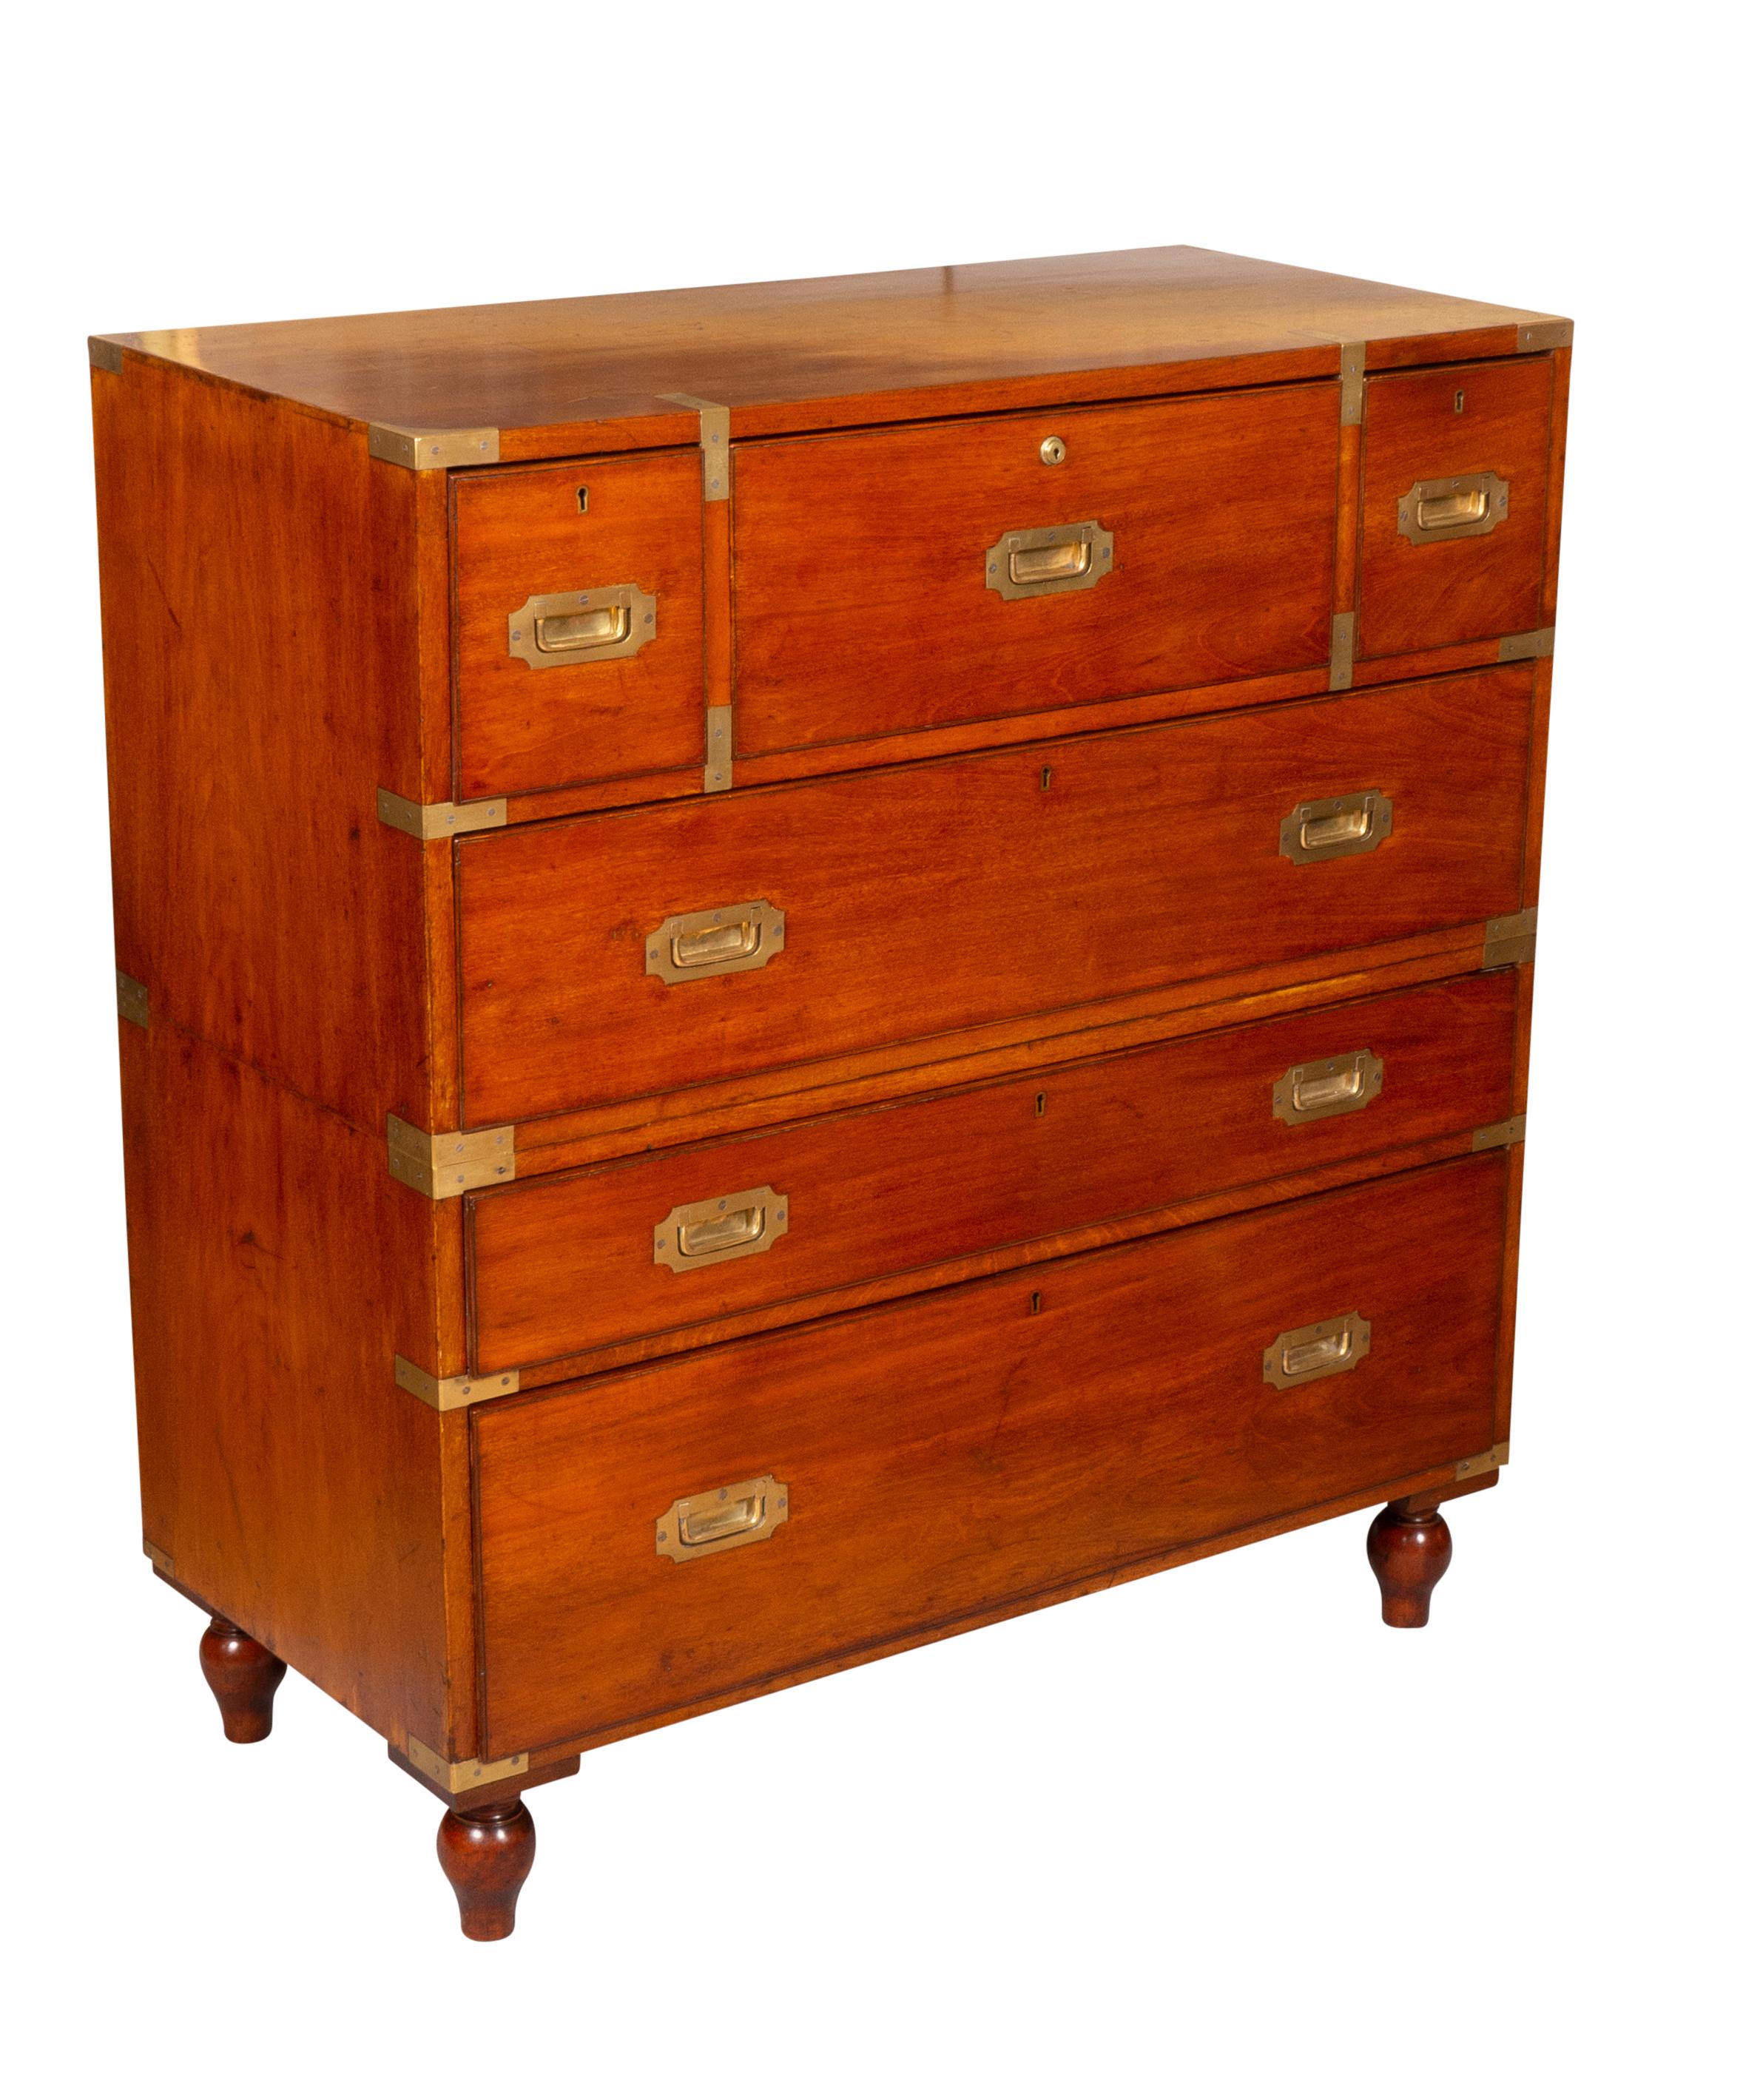 English Regency Mahogany Campaign Chest by Hill & Willard For Sale